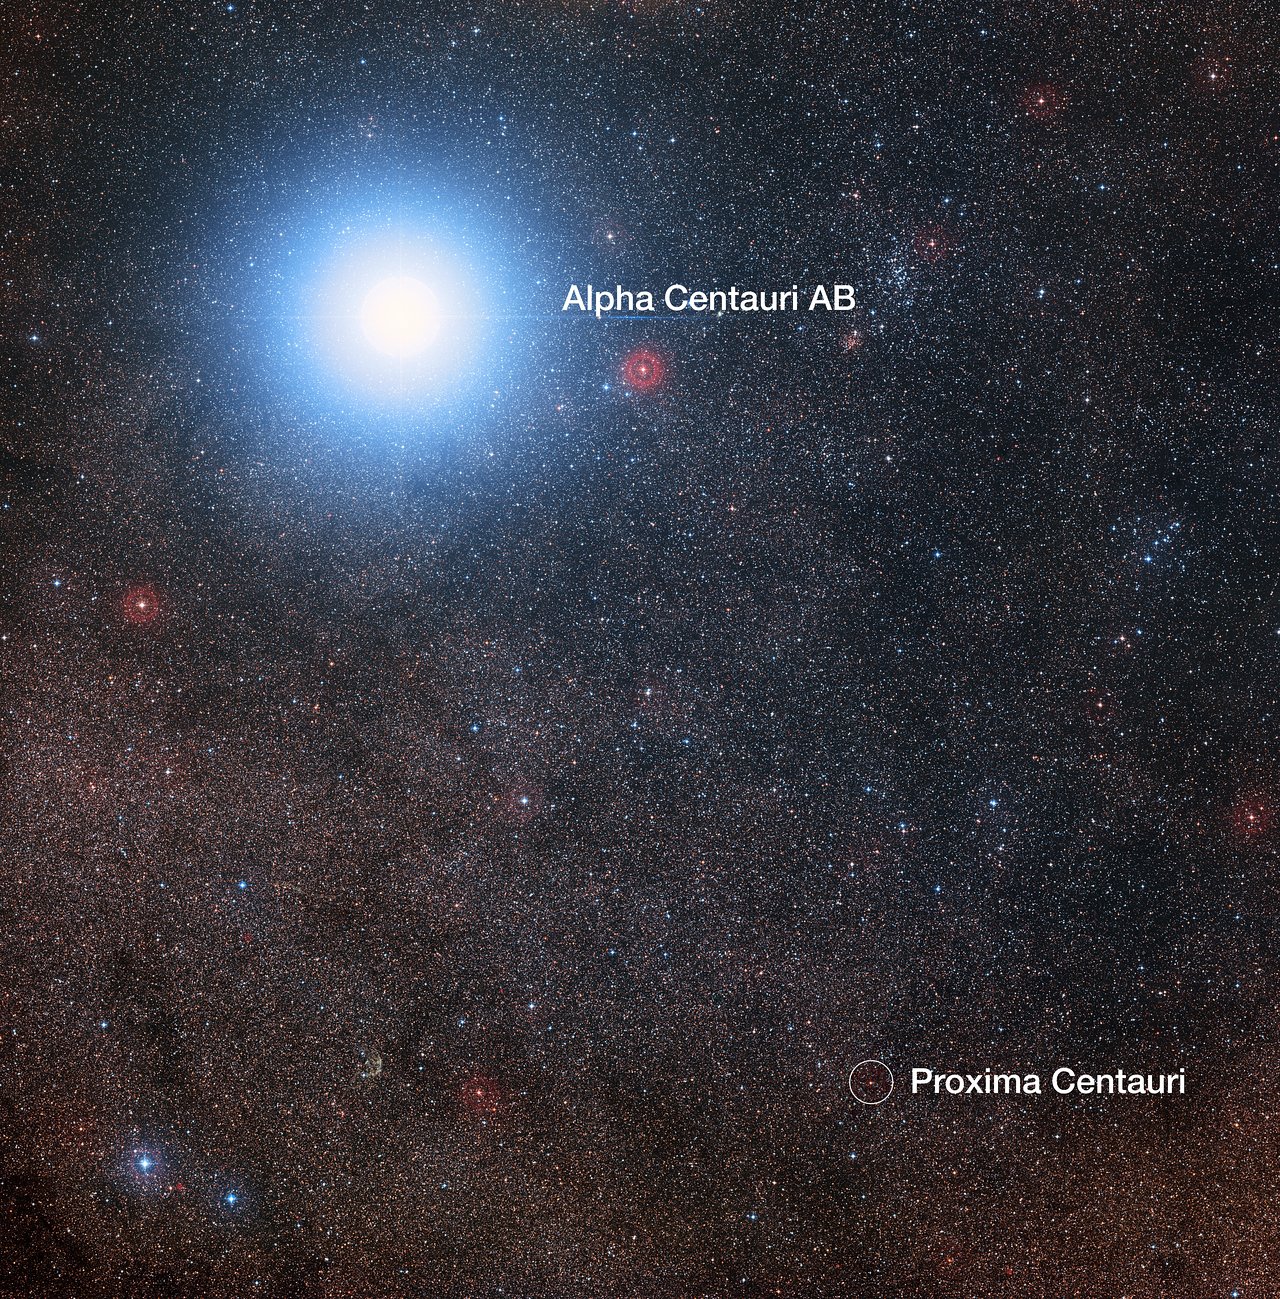 This image of the sky around the bright star Alpha Centauri AB also shows the much fainter red dwarf star, Proxima Centauri, the closest star to our solar system. The photo was created from pictures forming part of the Digitized Sky Survey 2. The blue halo around Alpha Centauri AB is an artifact of the photographic process; the star is actually pale yellow in color like our sun.